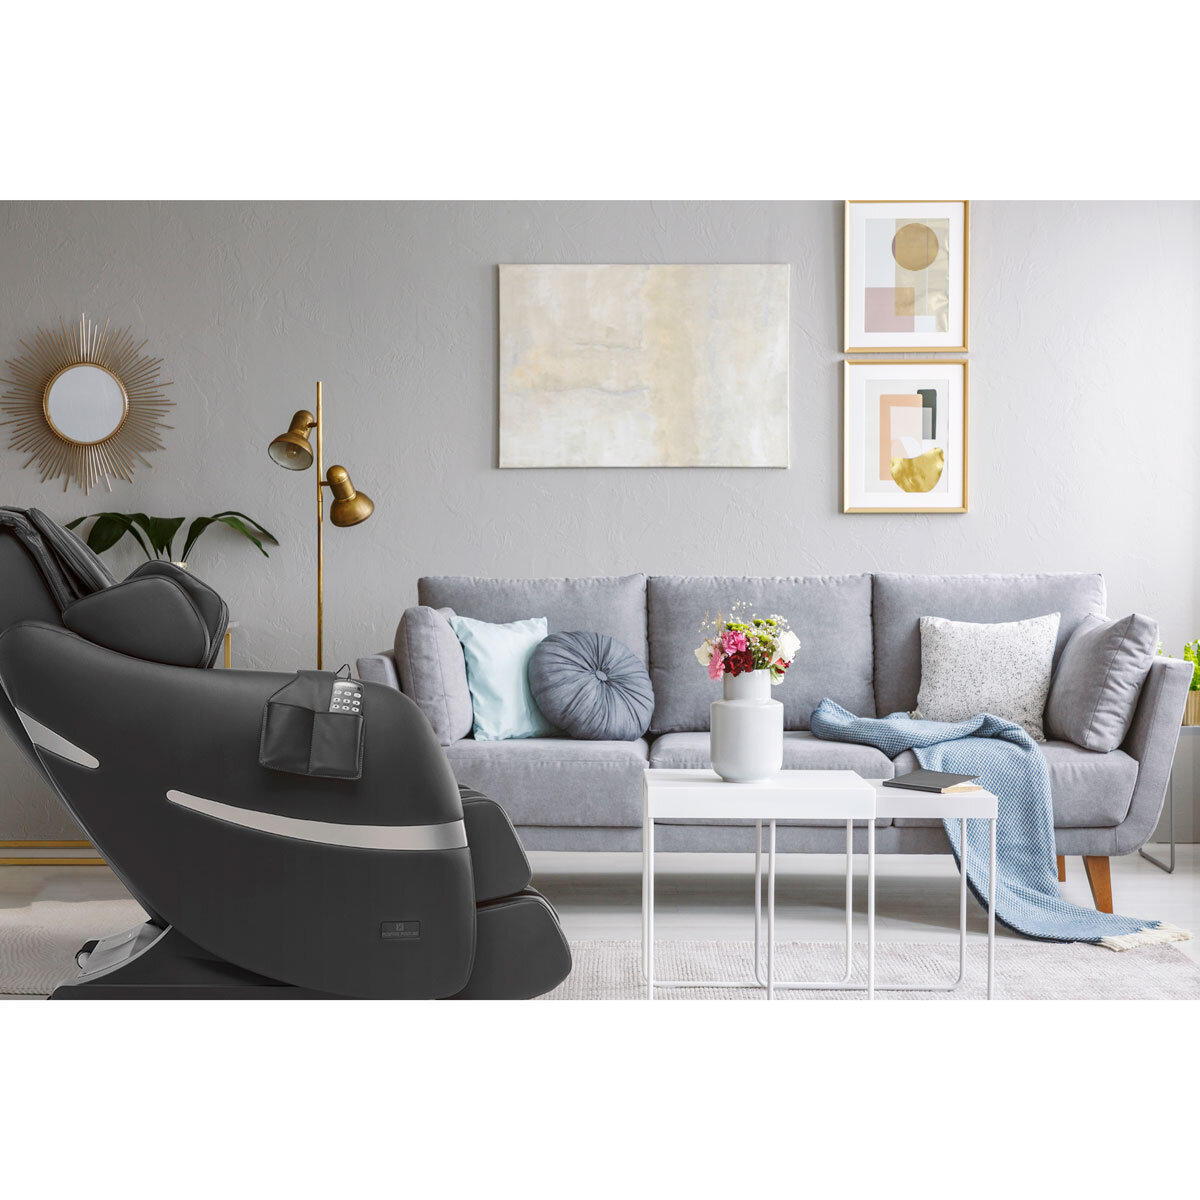 Lifestyle image of Brio+ Massage chair in lounge with light great sofa